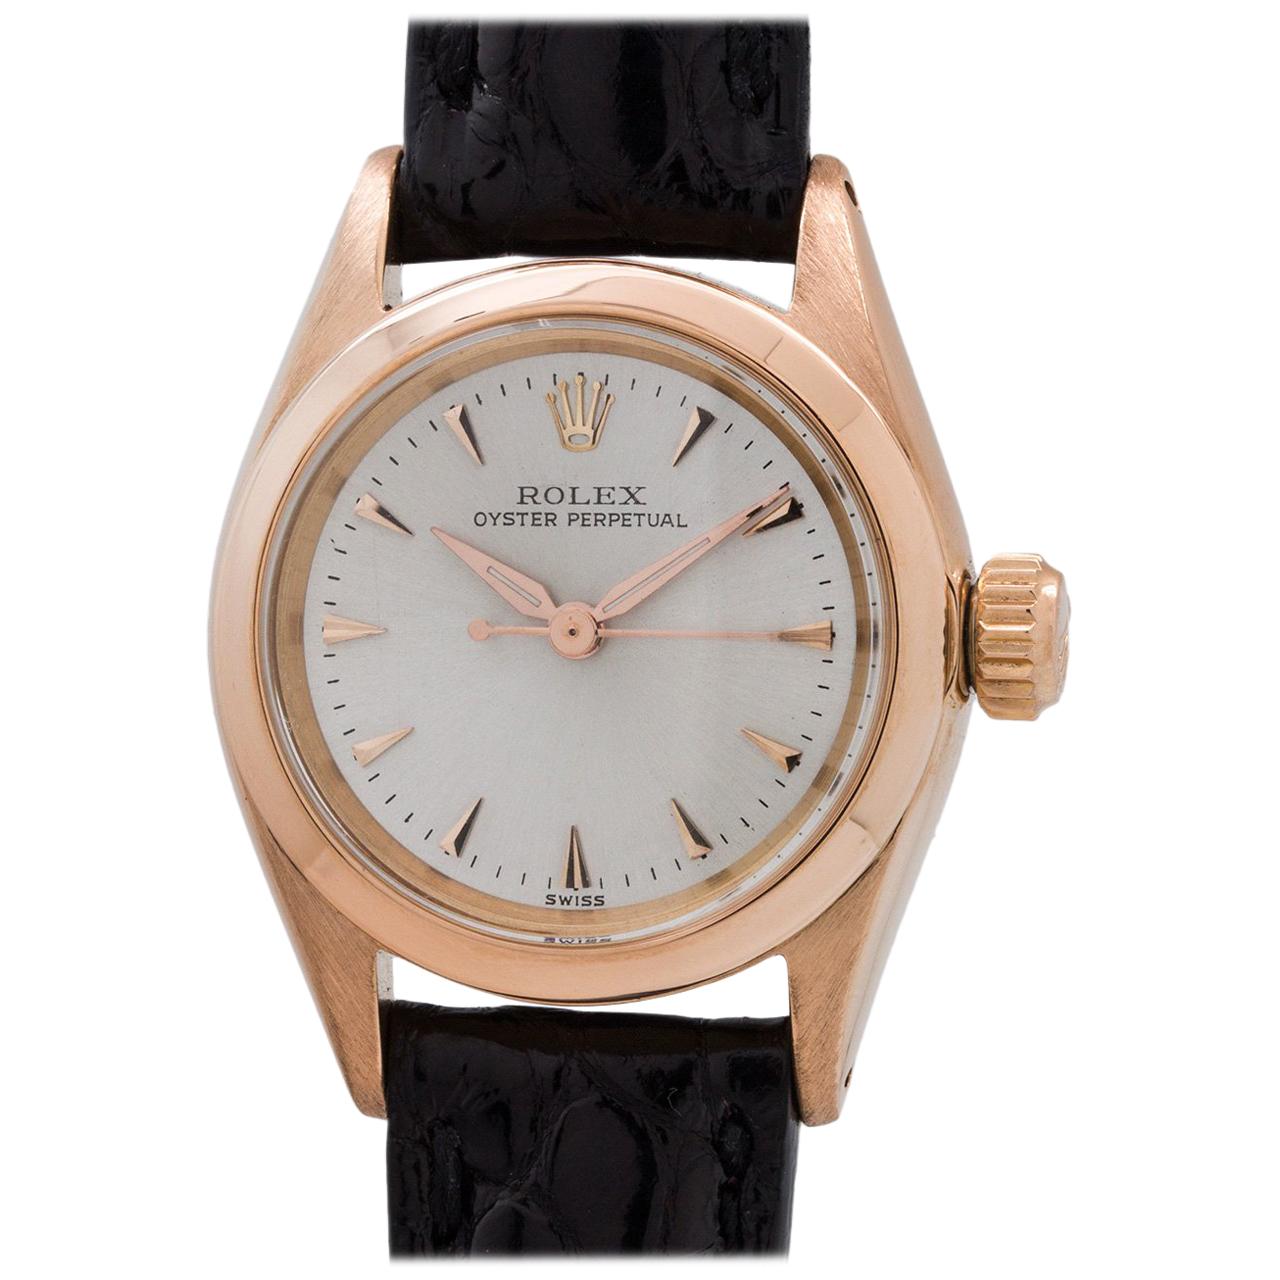 Lady’s Rolex 18 Karat Rose Gold Oyster Perpetual Ref 6619, circa 1960 For Sale